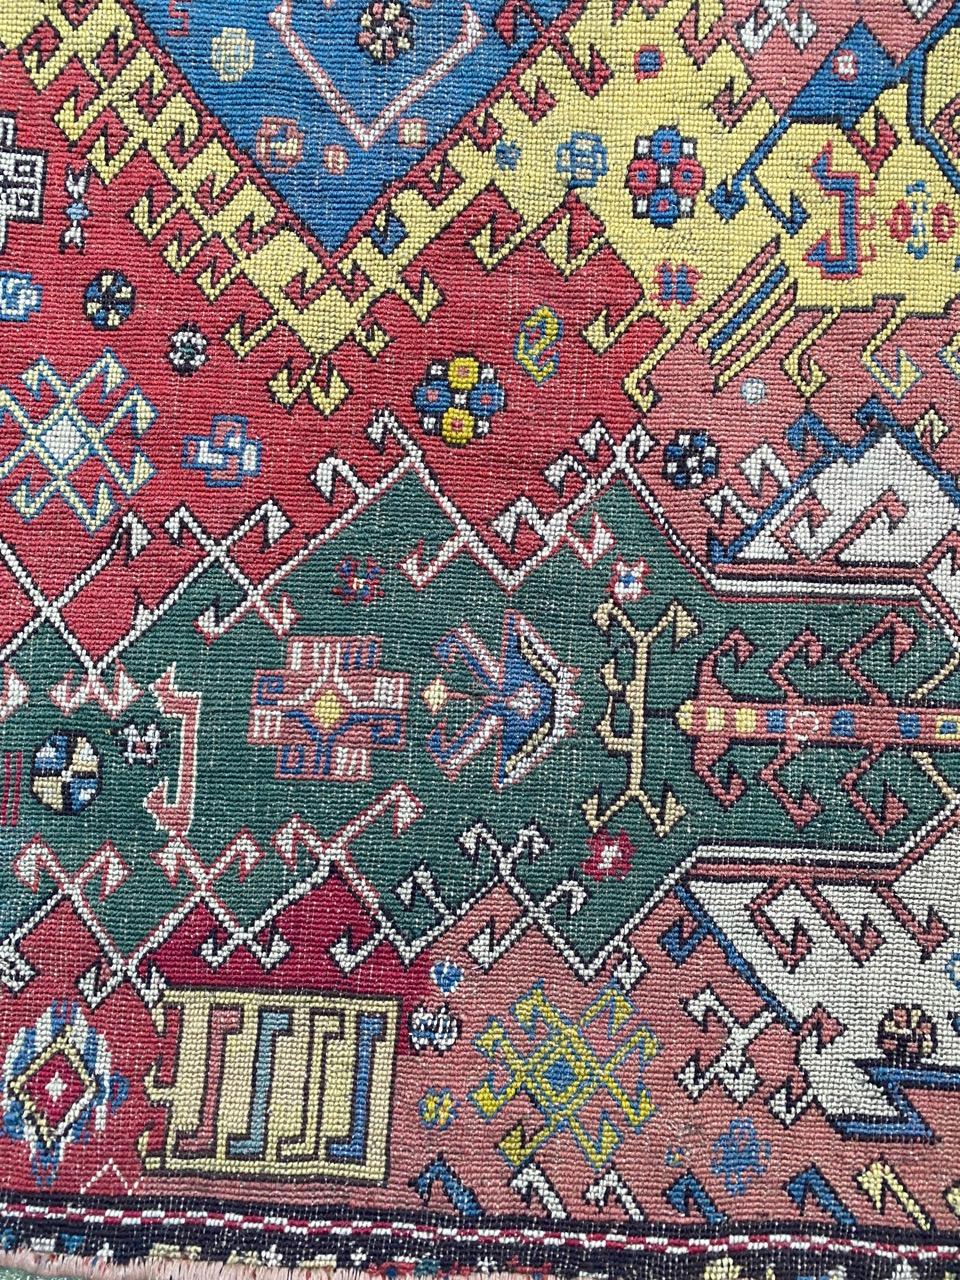 Wool Bobyrug’s Extraordinary Unusual Antique Caucasian Needlepoint Embroidered Rug For Sale